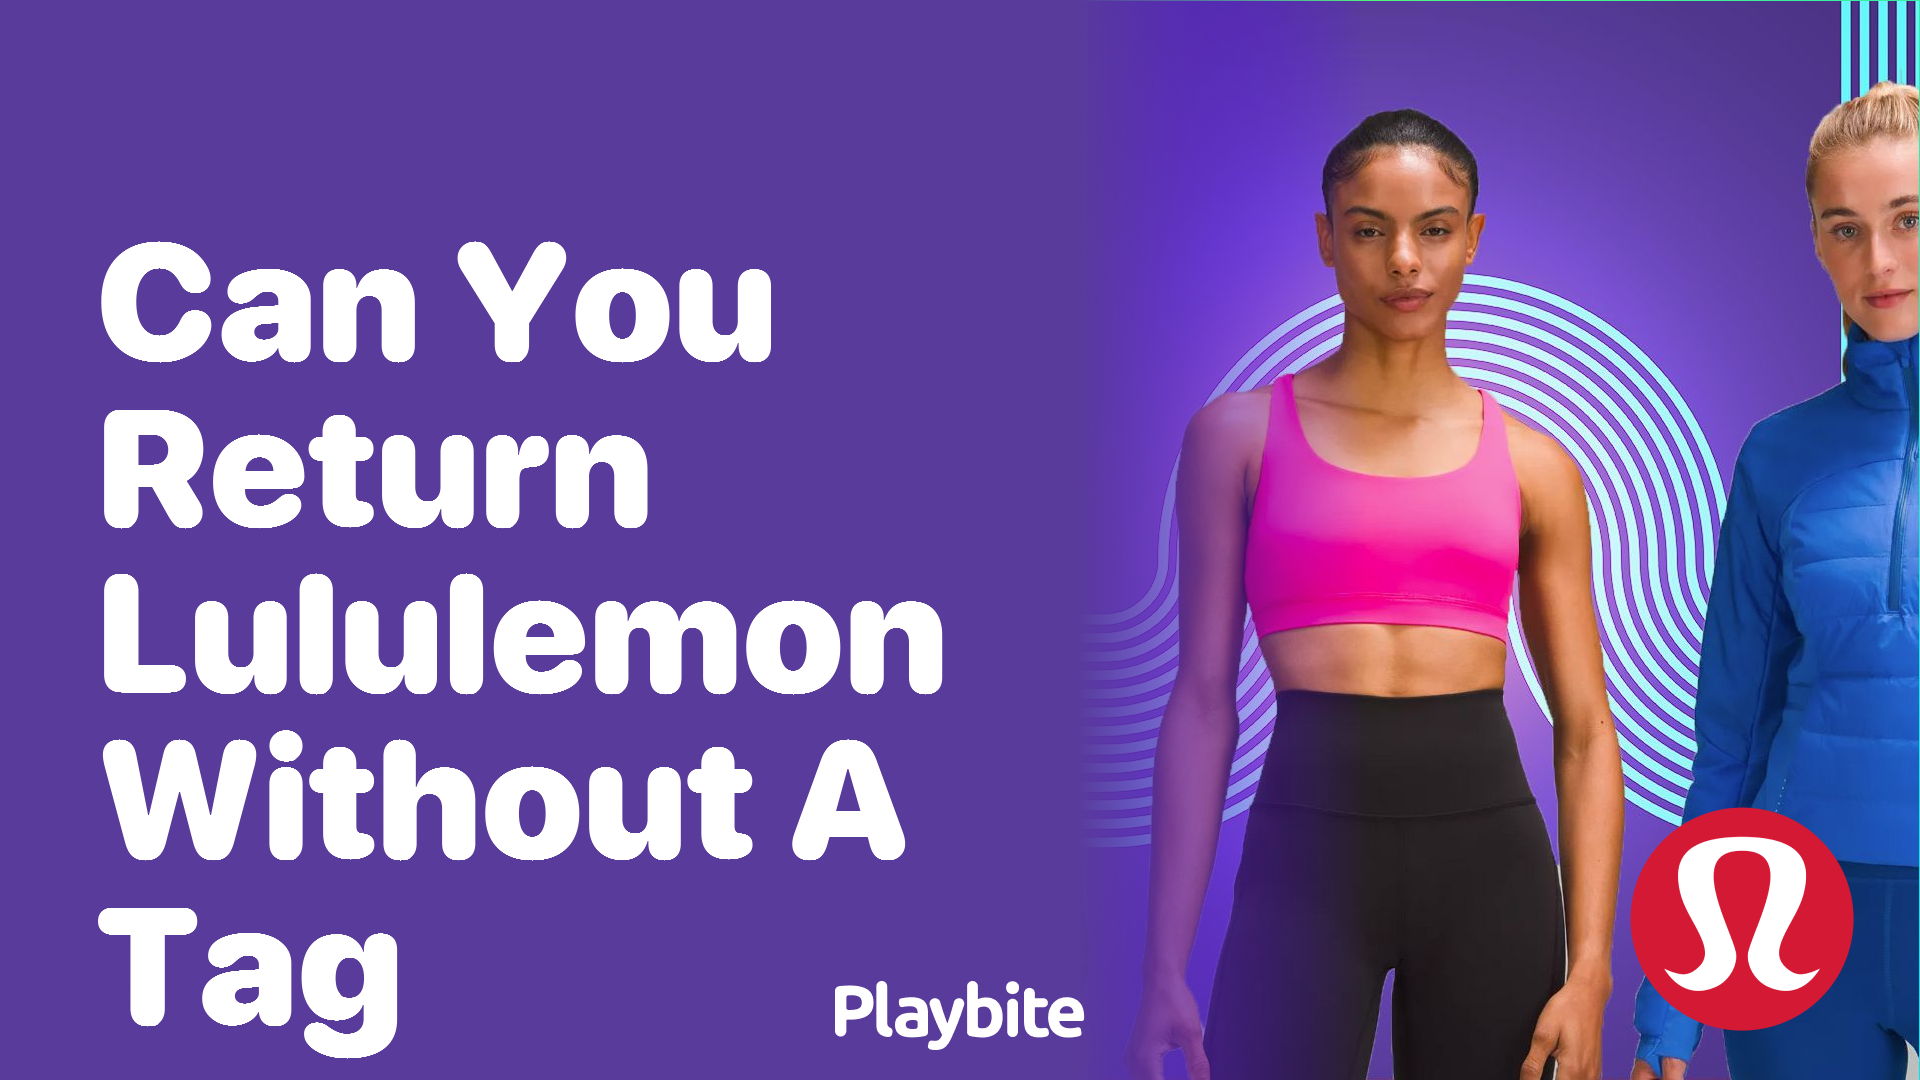 Can You Return Lululemon Without a Tag? - Playbite